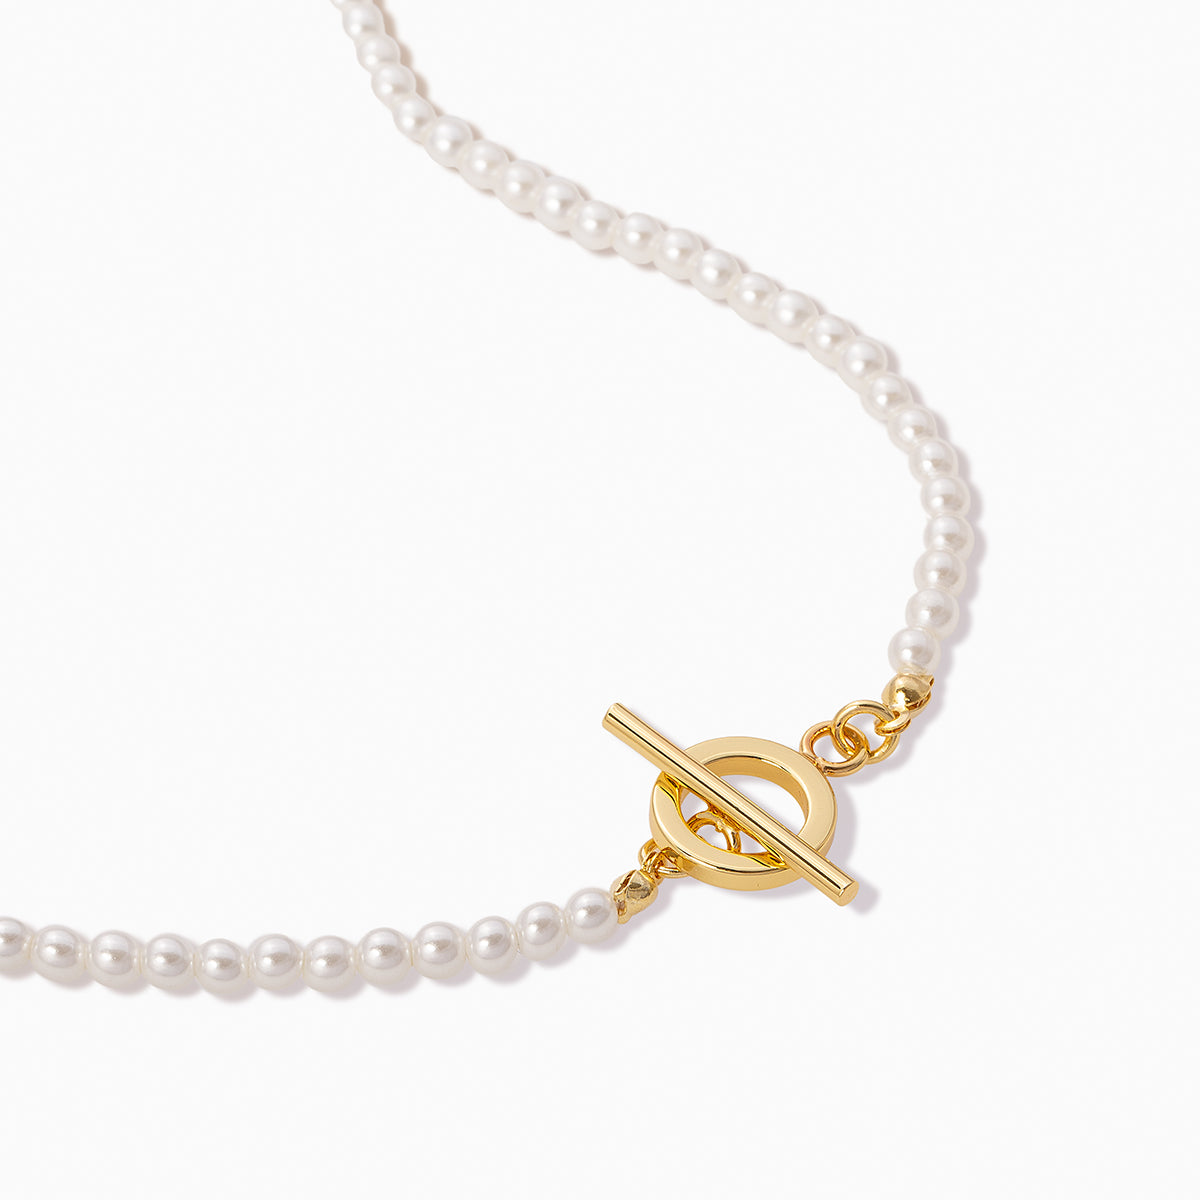 Pearl and Toggle Necklace | Gold | Product Detail Image | Uncommon James